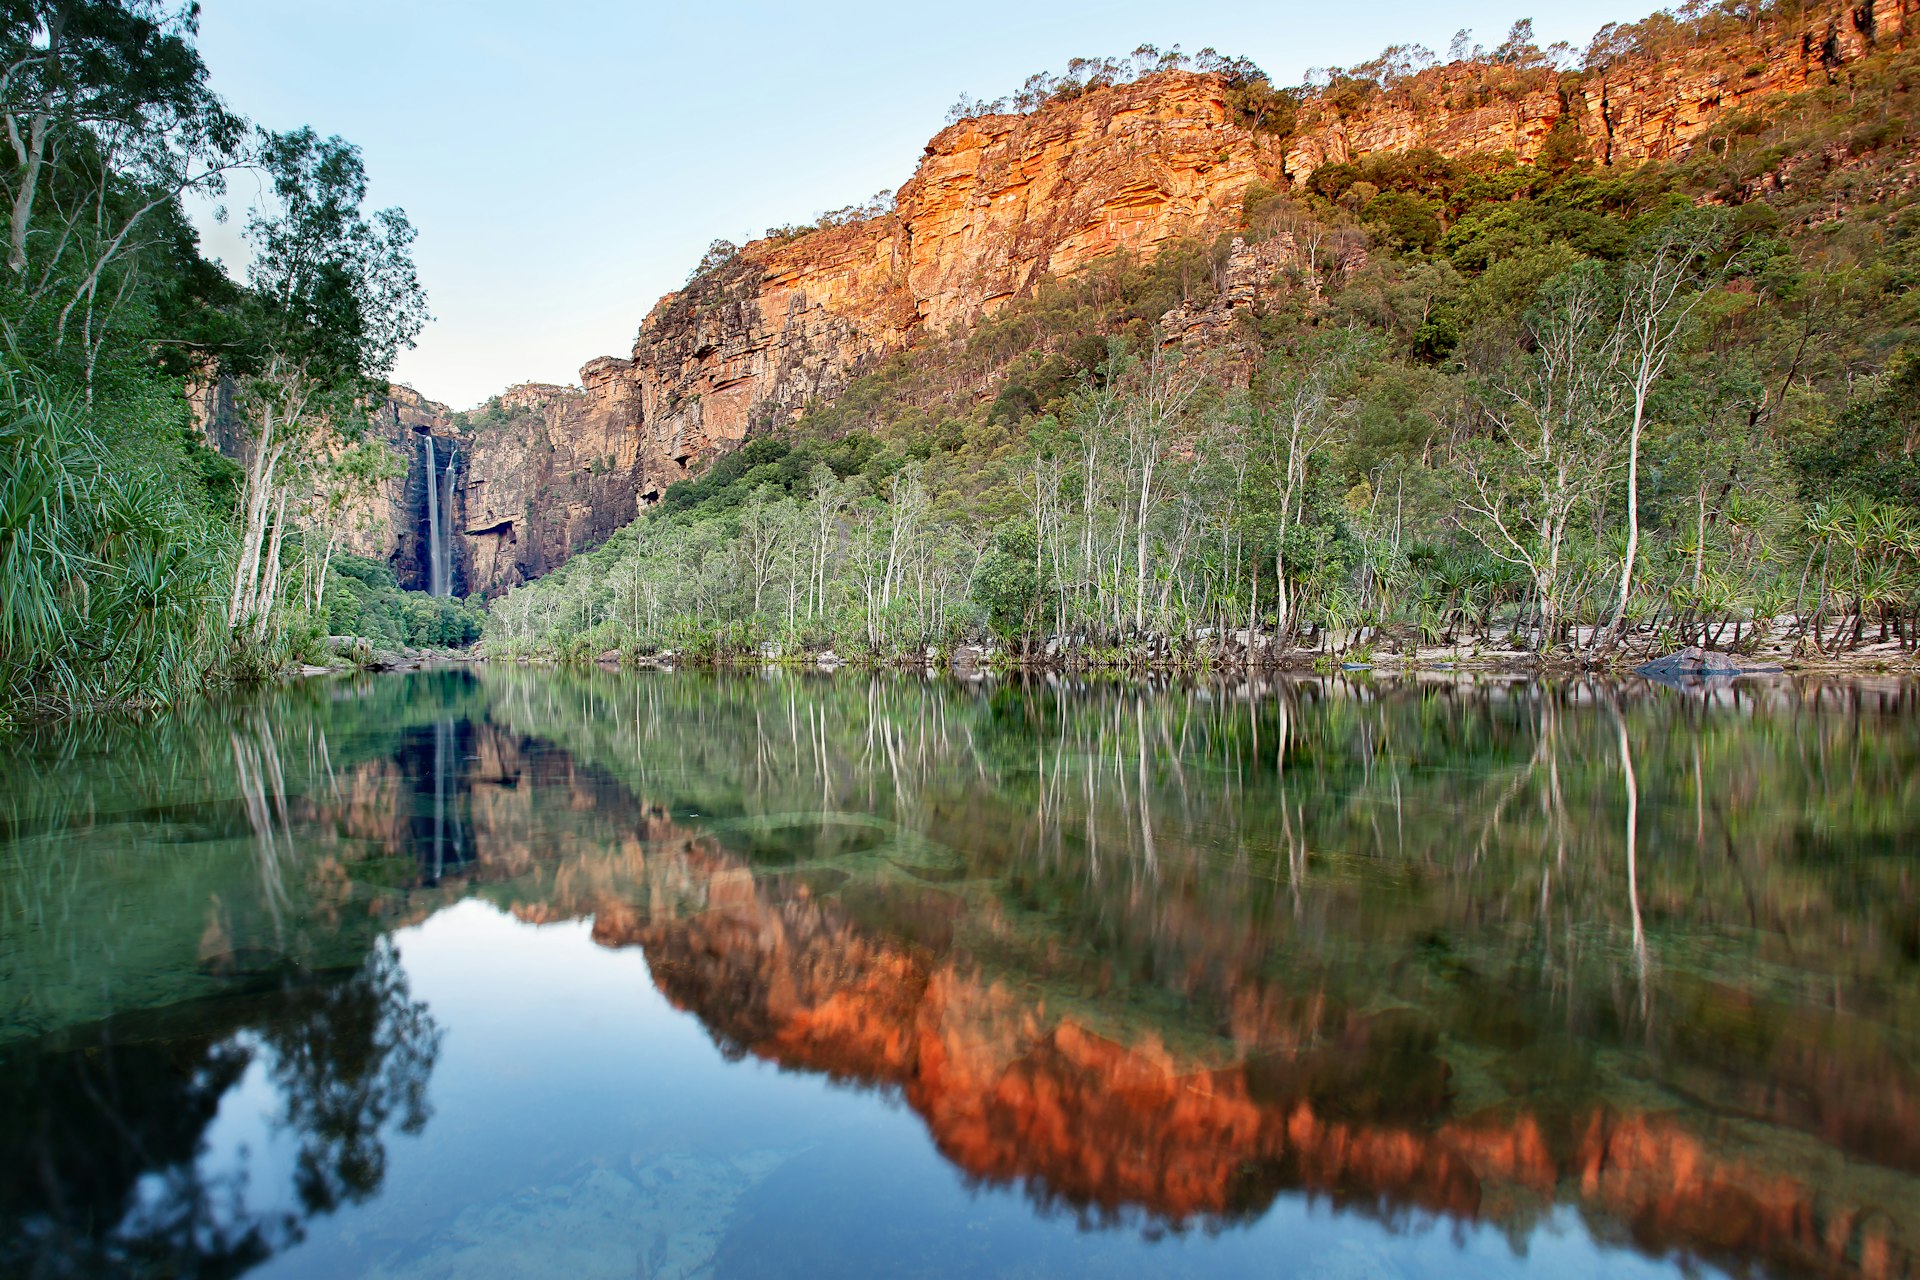 Glassy water is flanked by high trees and red cliffs on either side, with a waterfall at the furthest point from the camera. Kakadu National Park, Australia.